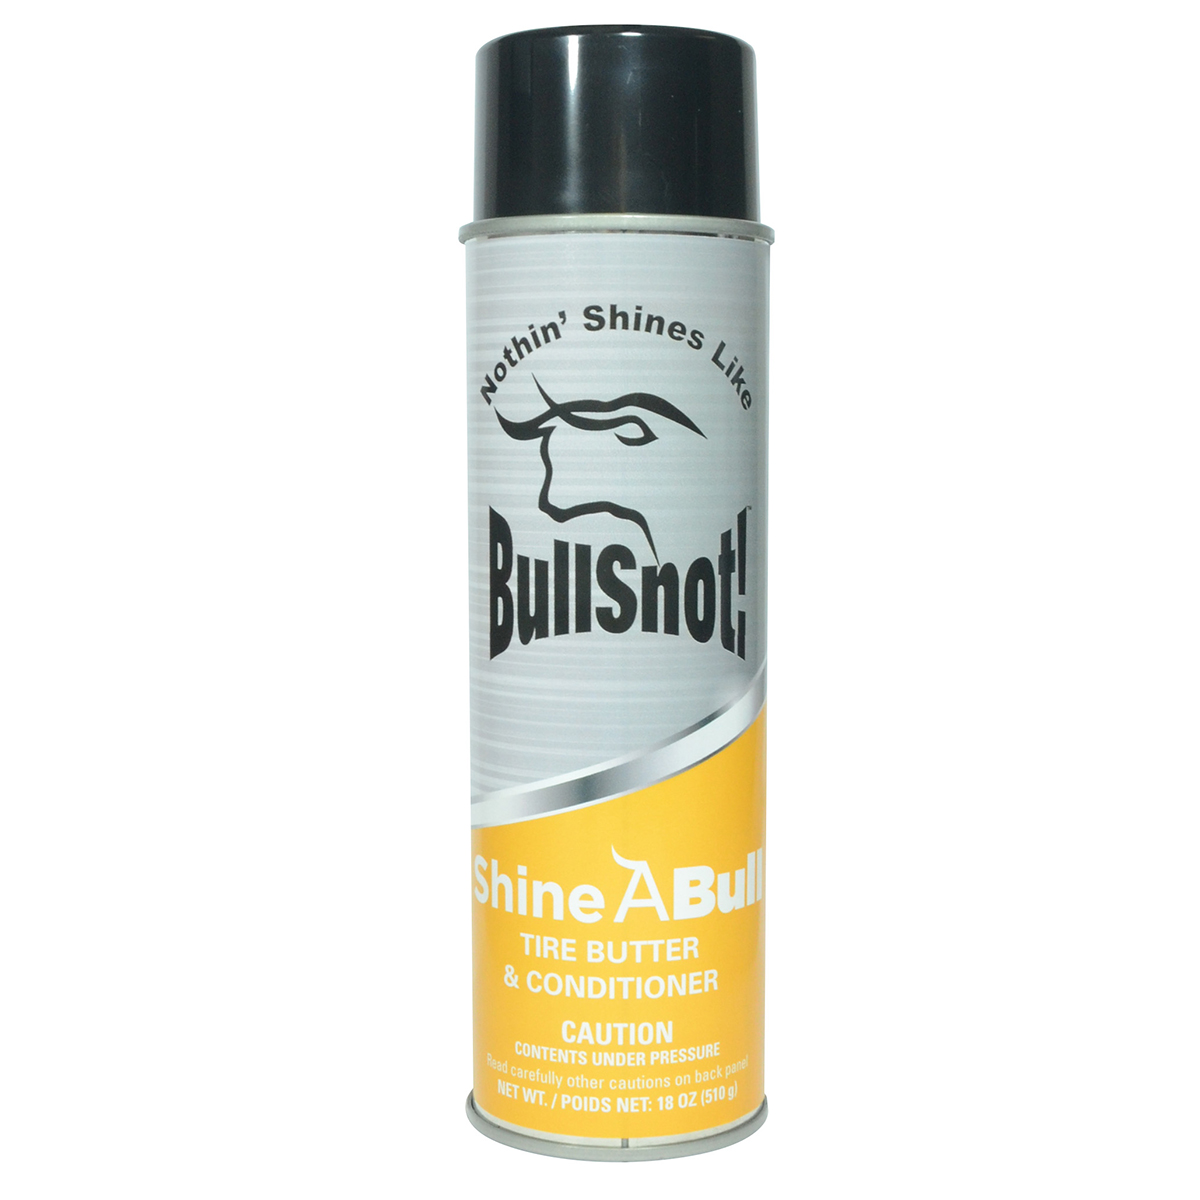 BullSnot ShineABull Tire Butter and Conditioner 10899017- Silicone-Free Tire Dressing and Truck Wheel Shine Auto Detailing 18oz